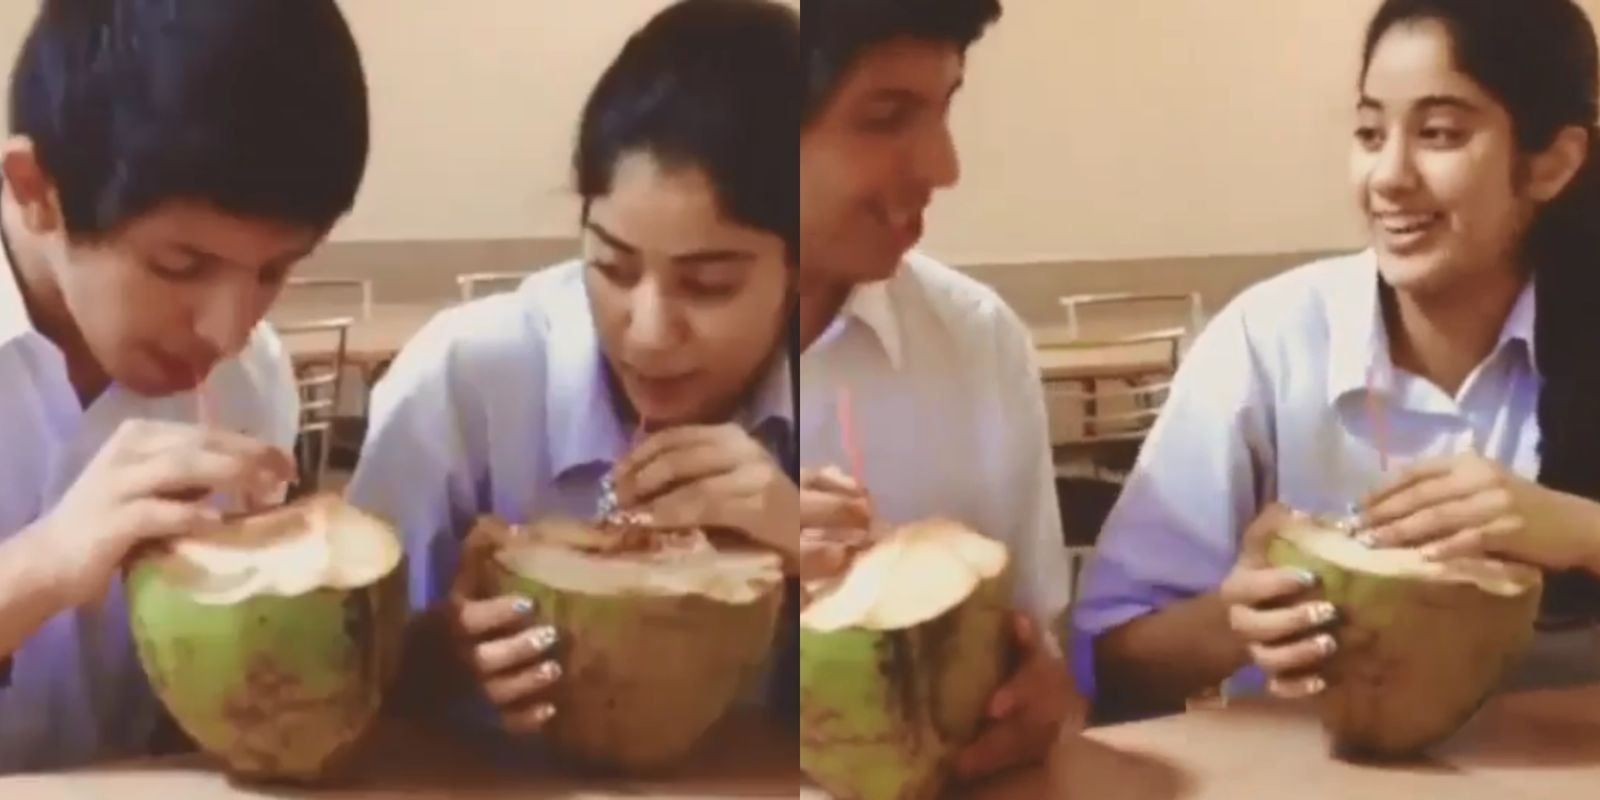 Janhvi Kapoor’s Hilarious Throwback Video With Her School Friend Will Leave You In Splits; Watch